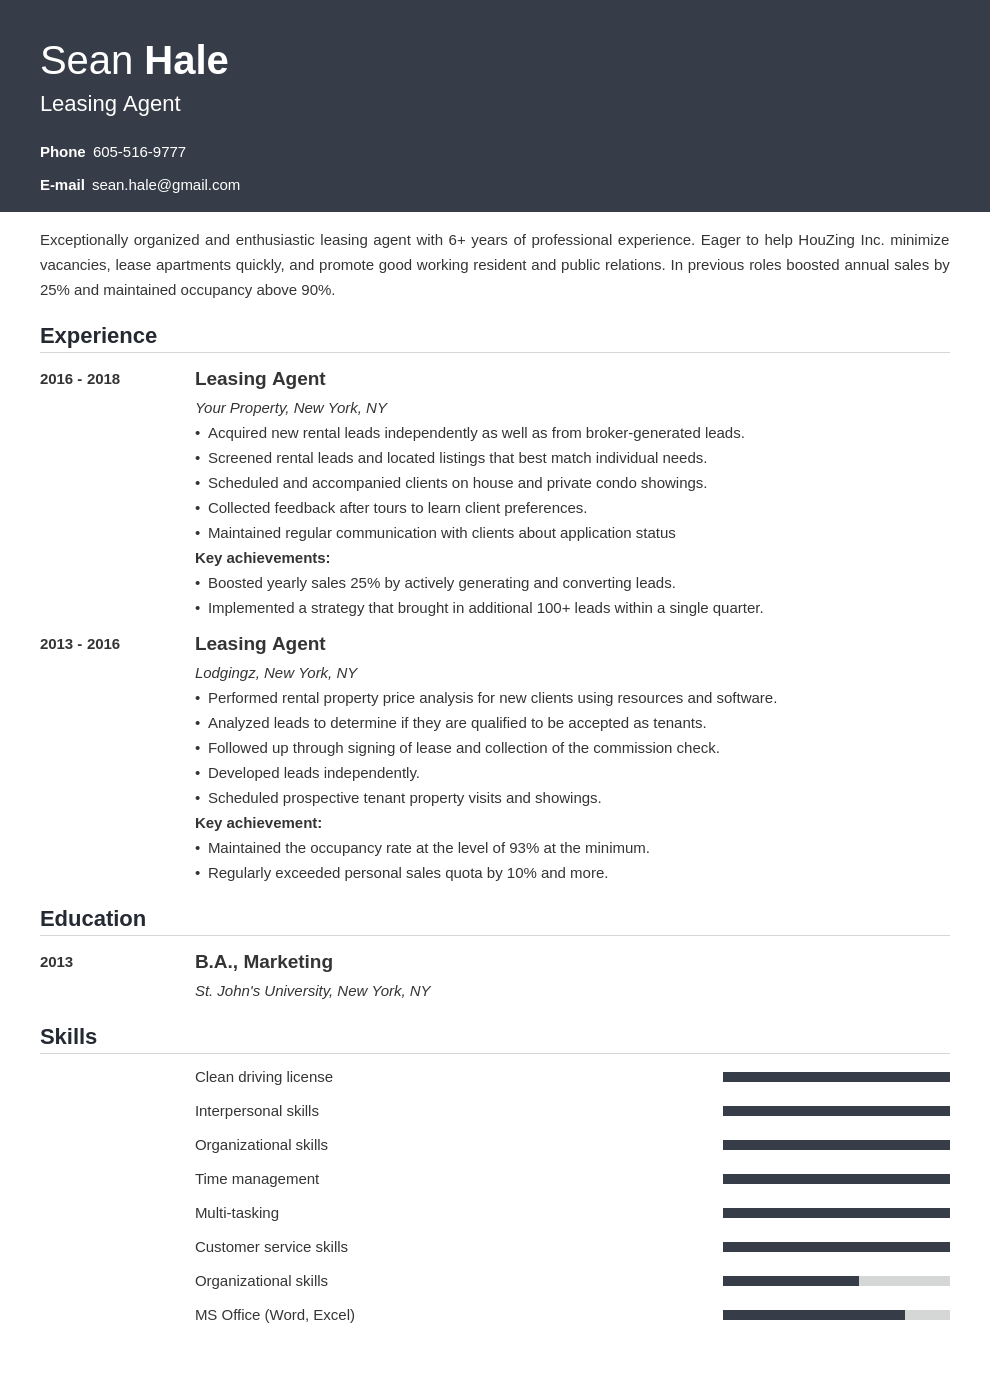 Leasing Agent Resume: Sample & Writing Guide [20+ Tips]